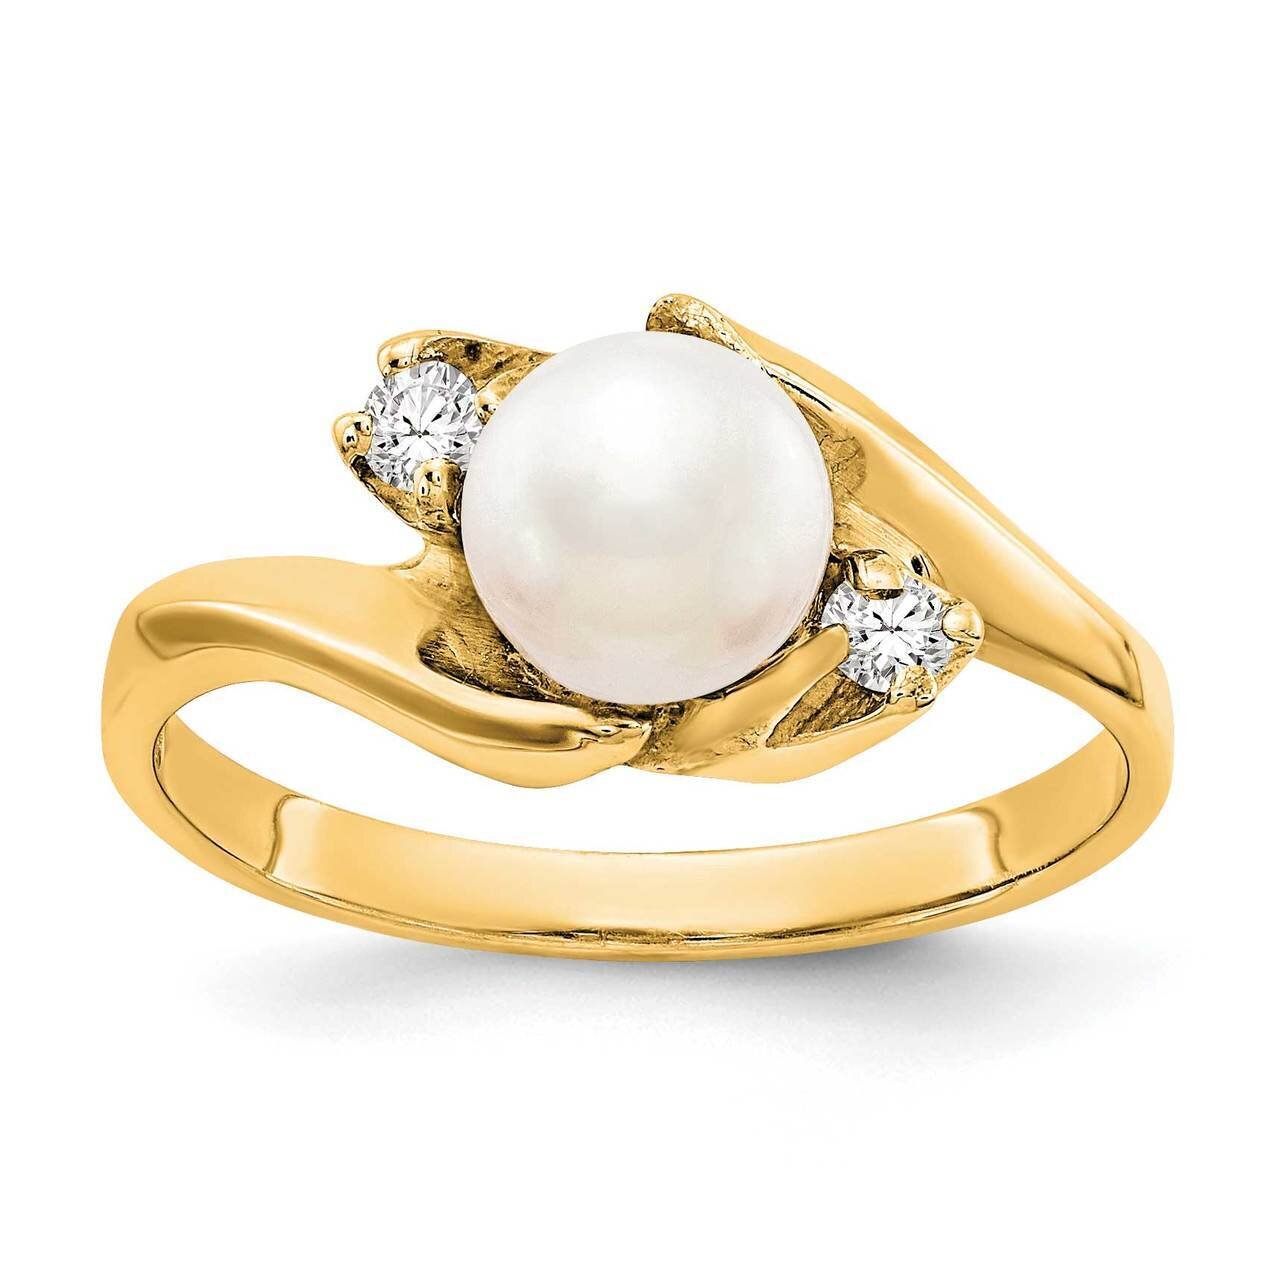 6mm Freshwater Cultured Pearl Diamond Ring 14k Gold Y1932PL_AA